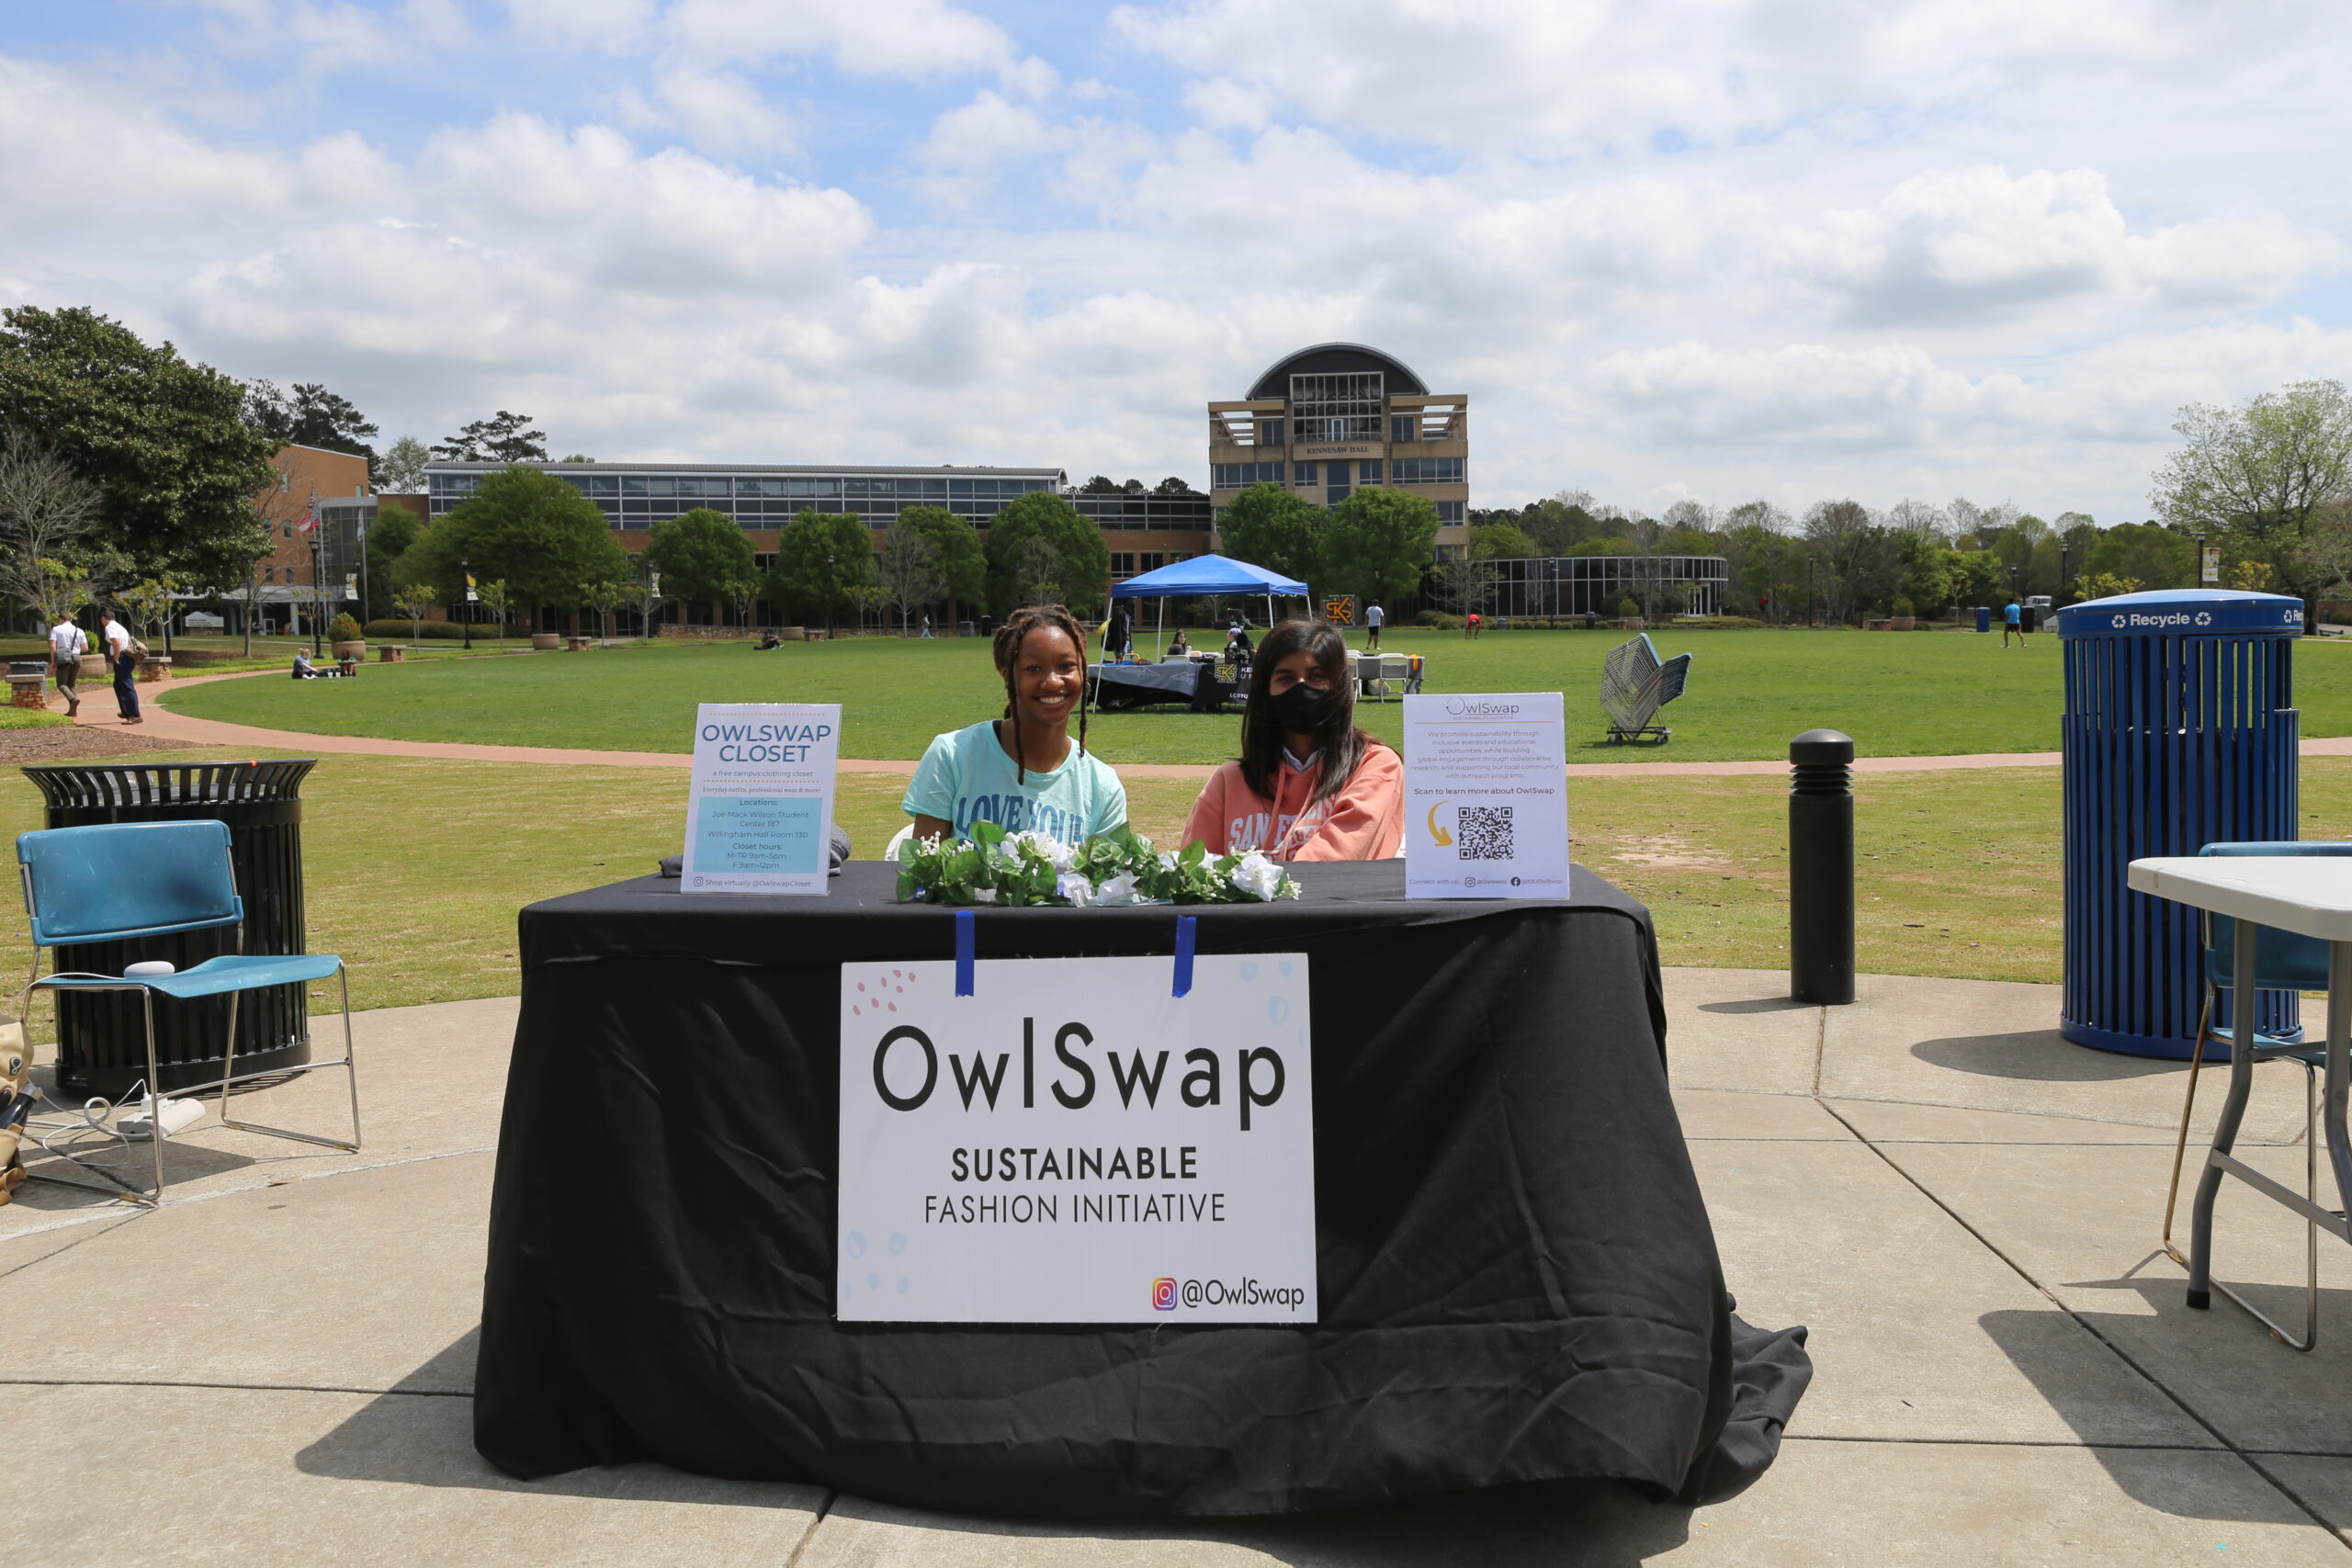 One of the opportunities for volunteering for students is to work with OwlSwap. Photo taken by Emma Eagle.